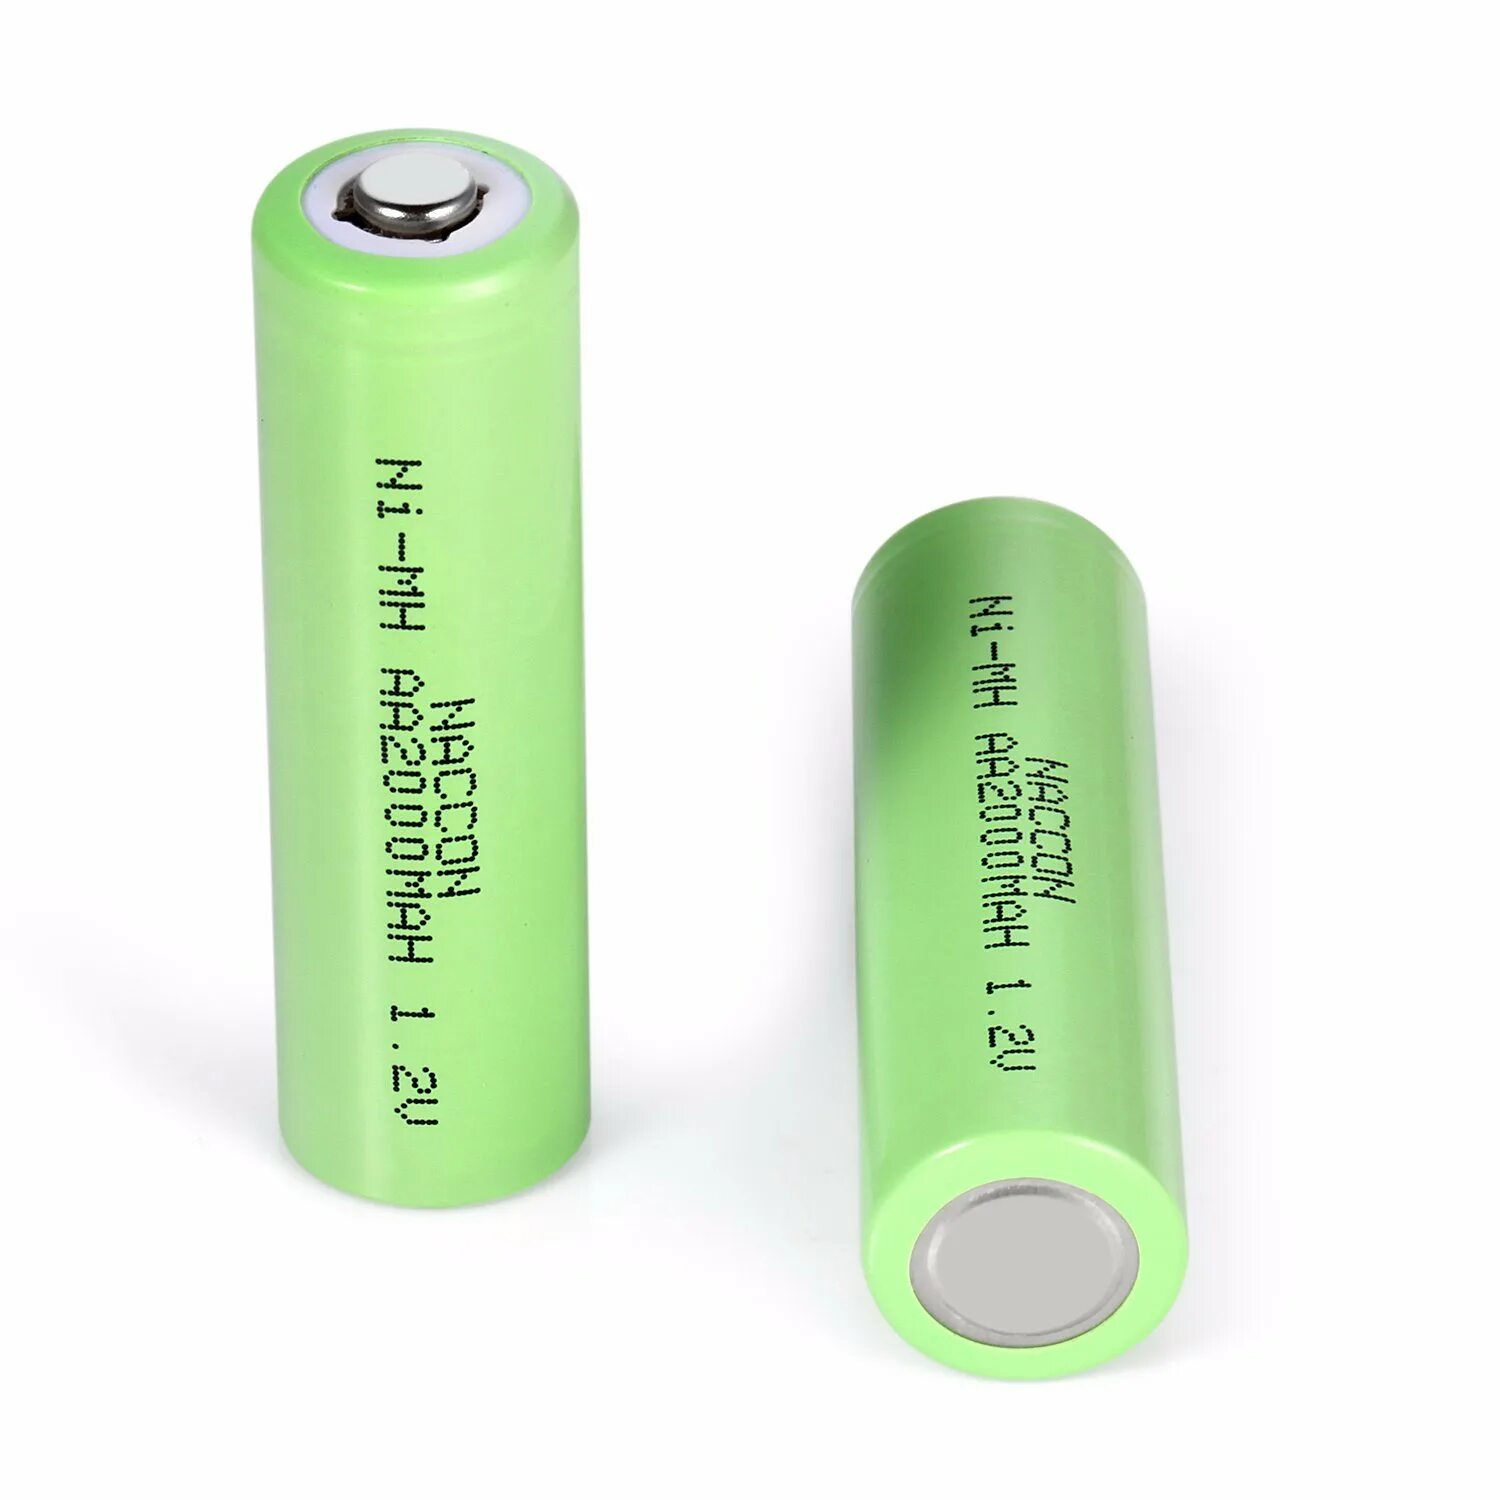 Nimh battery. Ni-MH aa1200mah 1.2v аккумулятор. Аккумулятор ni-MH 1.2V 3000mah. Аккумуляторные батарейки 1.2v 700mah. АКБ ni MN High quality Rechargeable Battery AA 3000mah 4 x BTY ni-MH 1.2V 2a with.